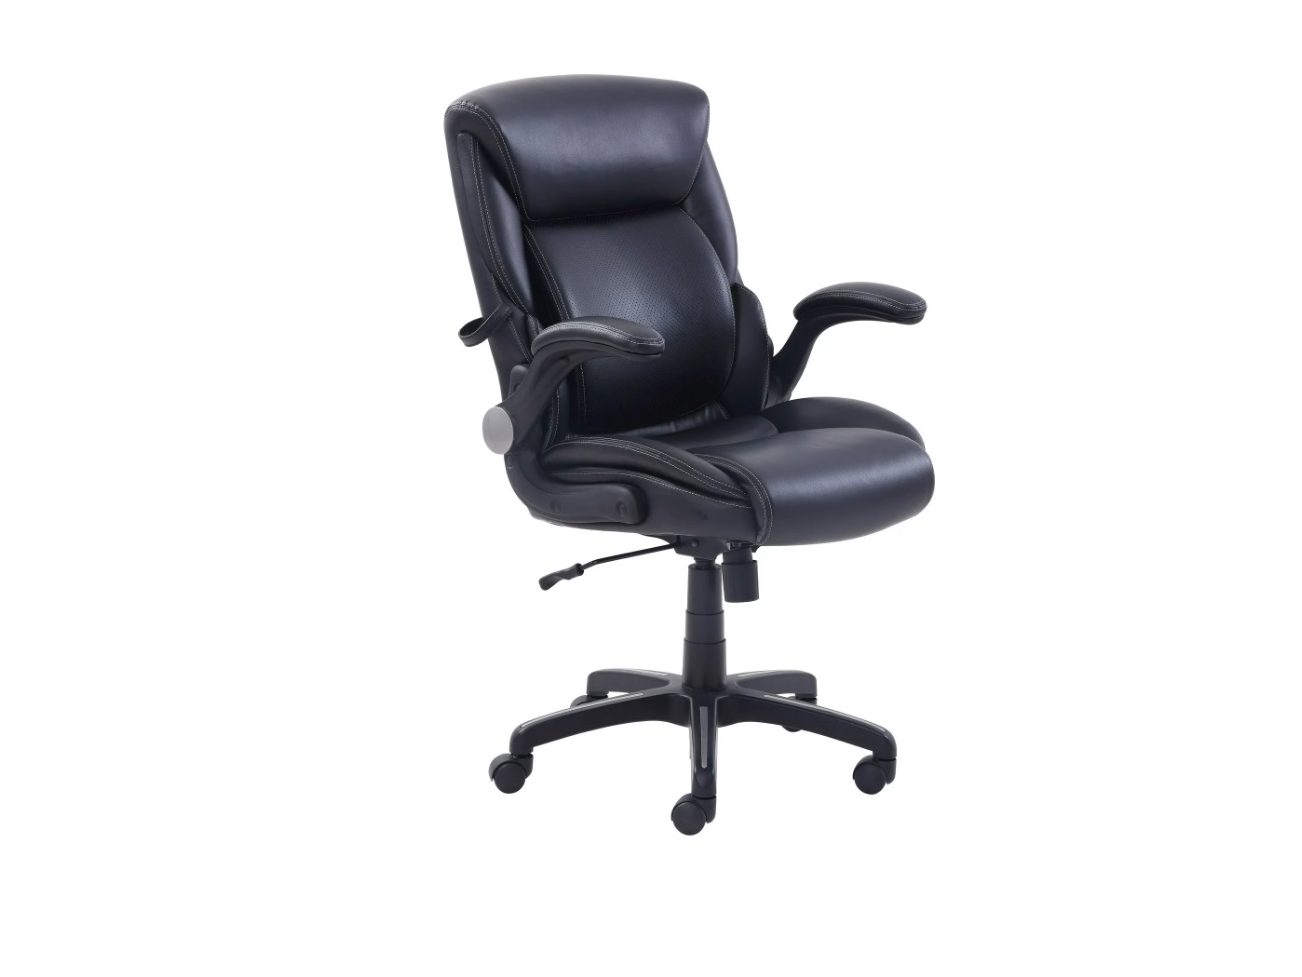 SOMEET Ergonomic Office Chair Home Office Desk Chair with Lumbar Support  High Back Mesh Office Chair Computer Desk Chair, Adjustable Headrest &  Flip-Up Armrest, Black - Coupon Codes, Promo Codes, Daily Deals